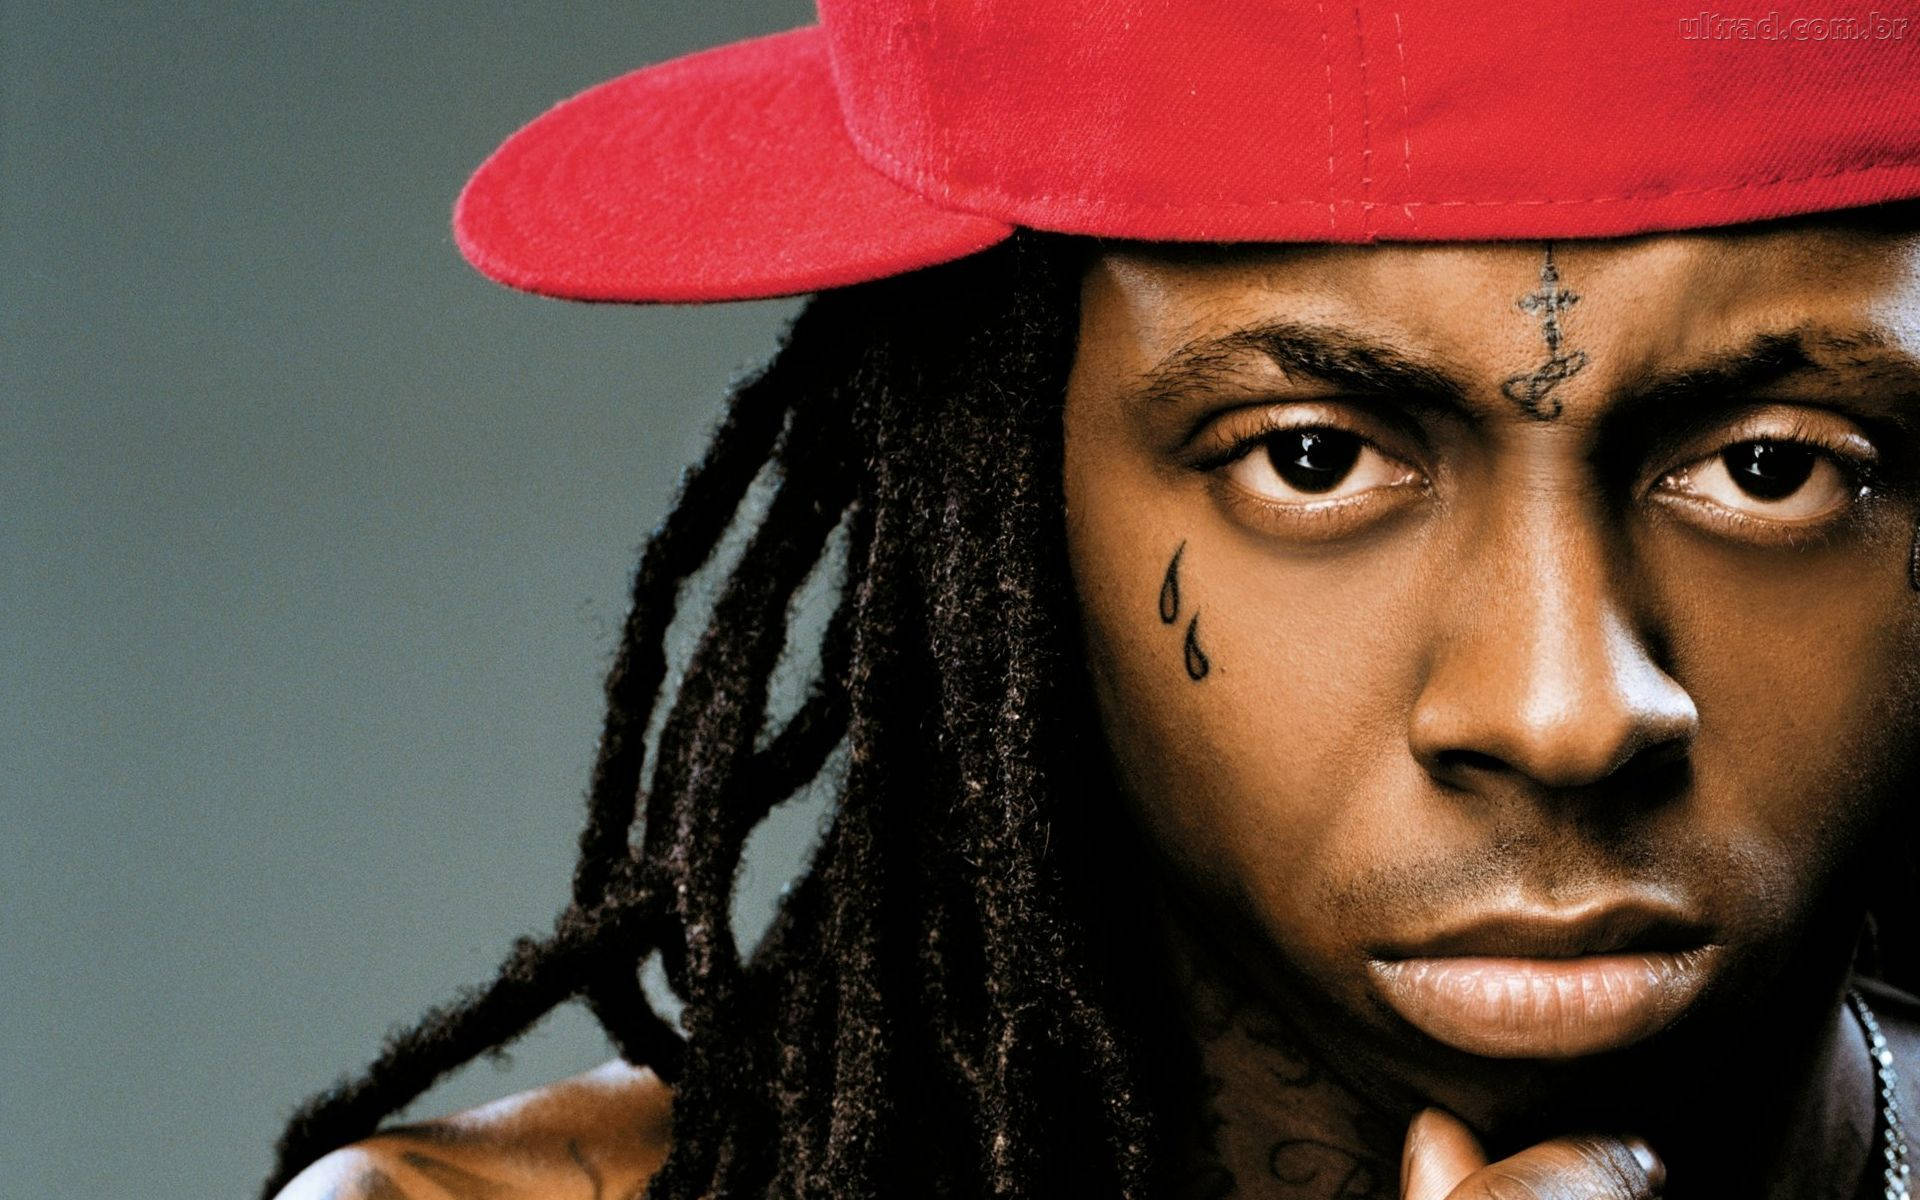 Caption: Lil Wayne Performing On Stage Wallpaper